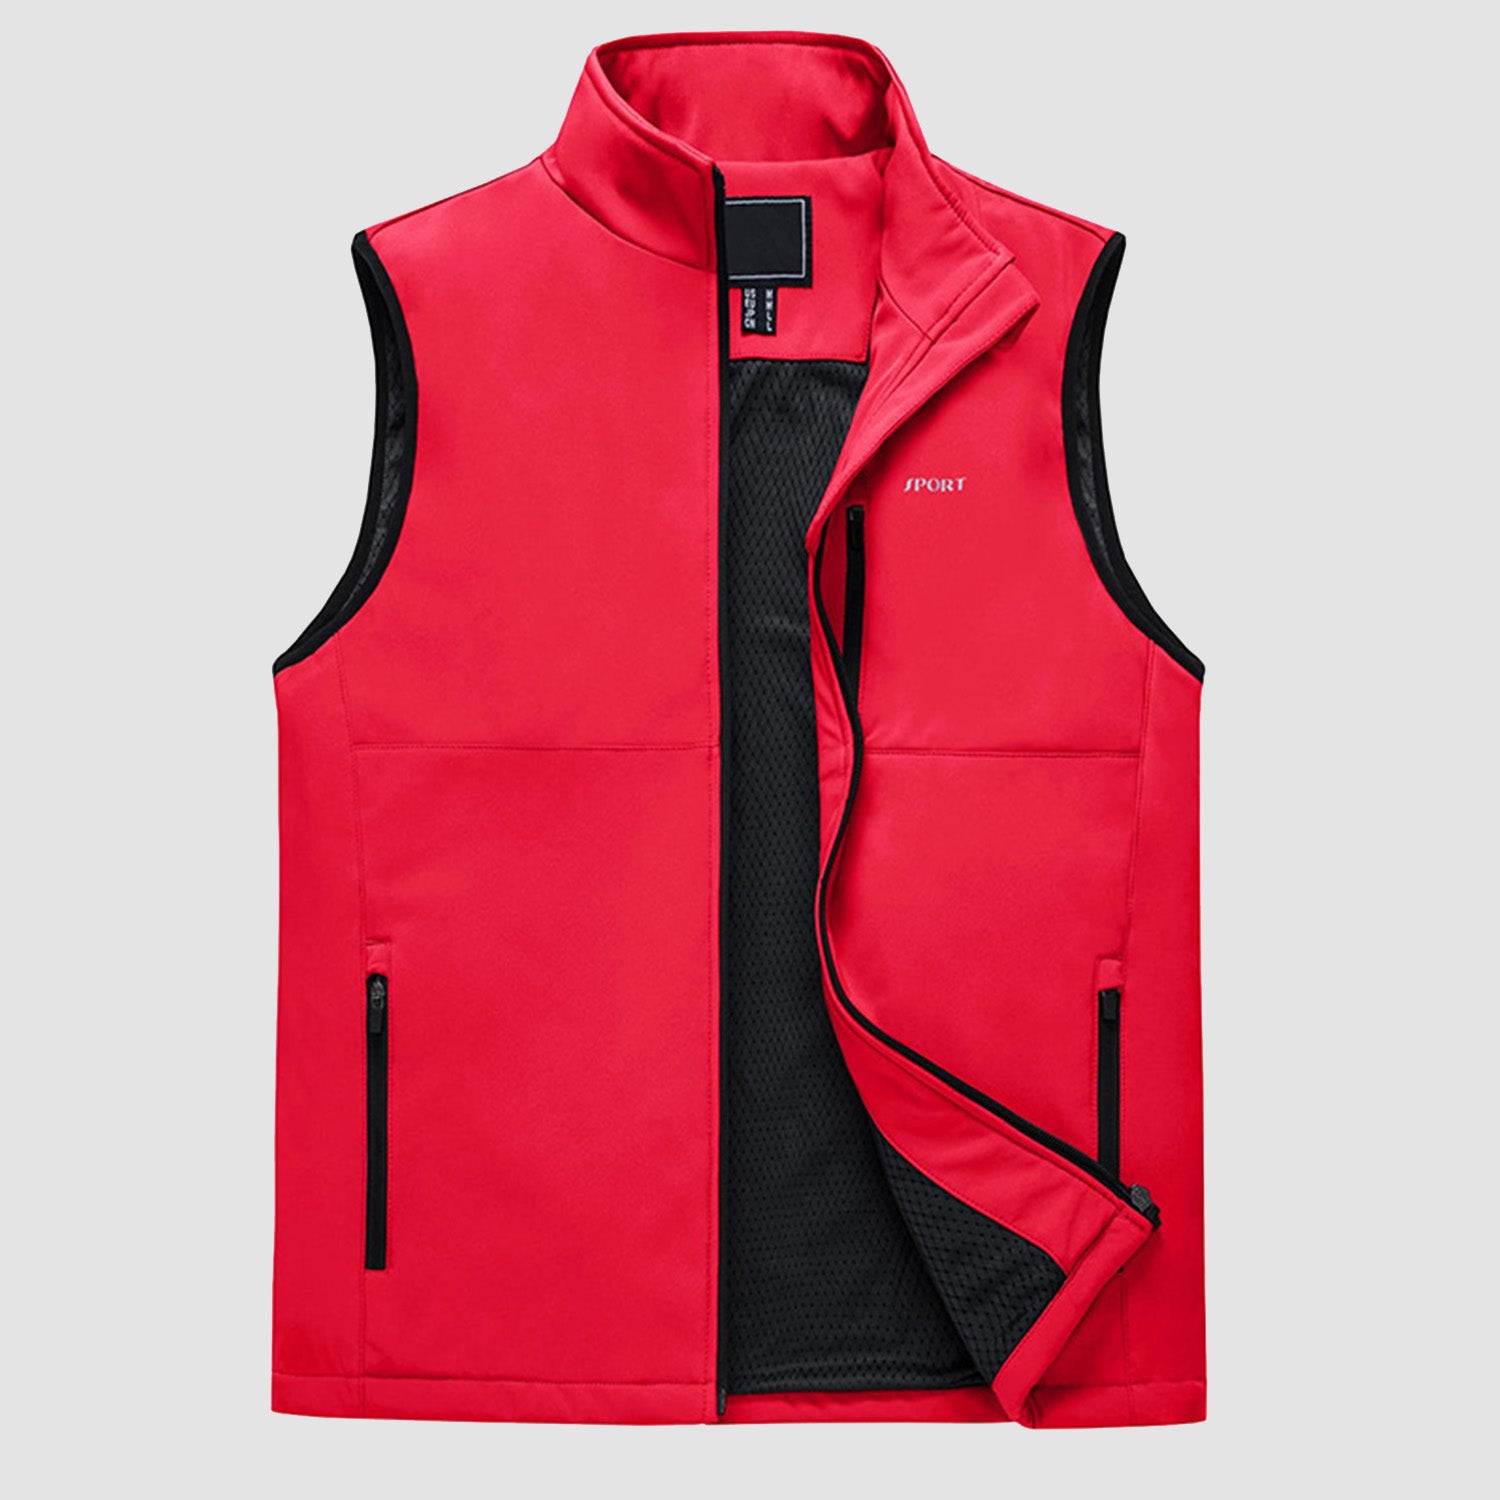 Men's Lightweight Vest Windproof Sleeveless Jacket Outdoor Hiking Camping Fishing Photography Gilet with Zip Pockets